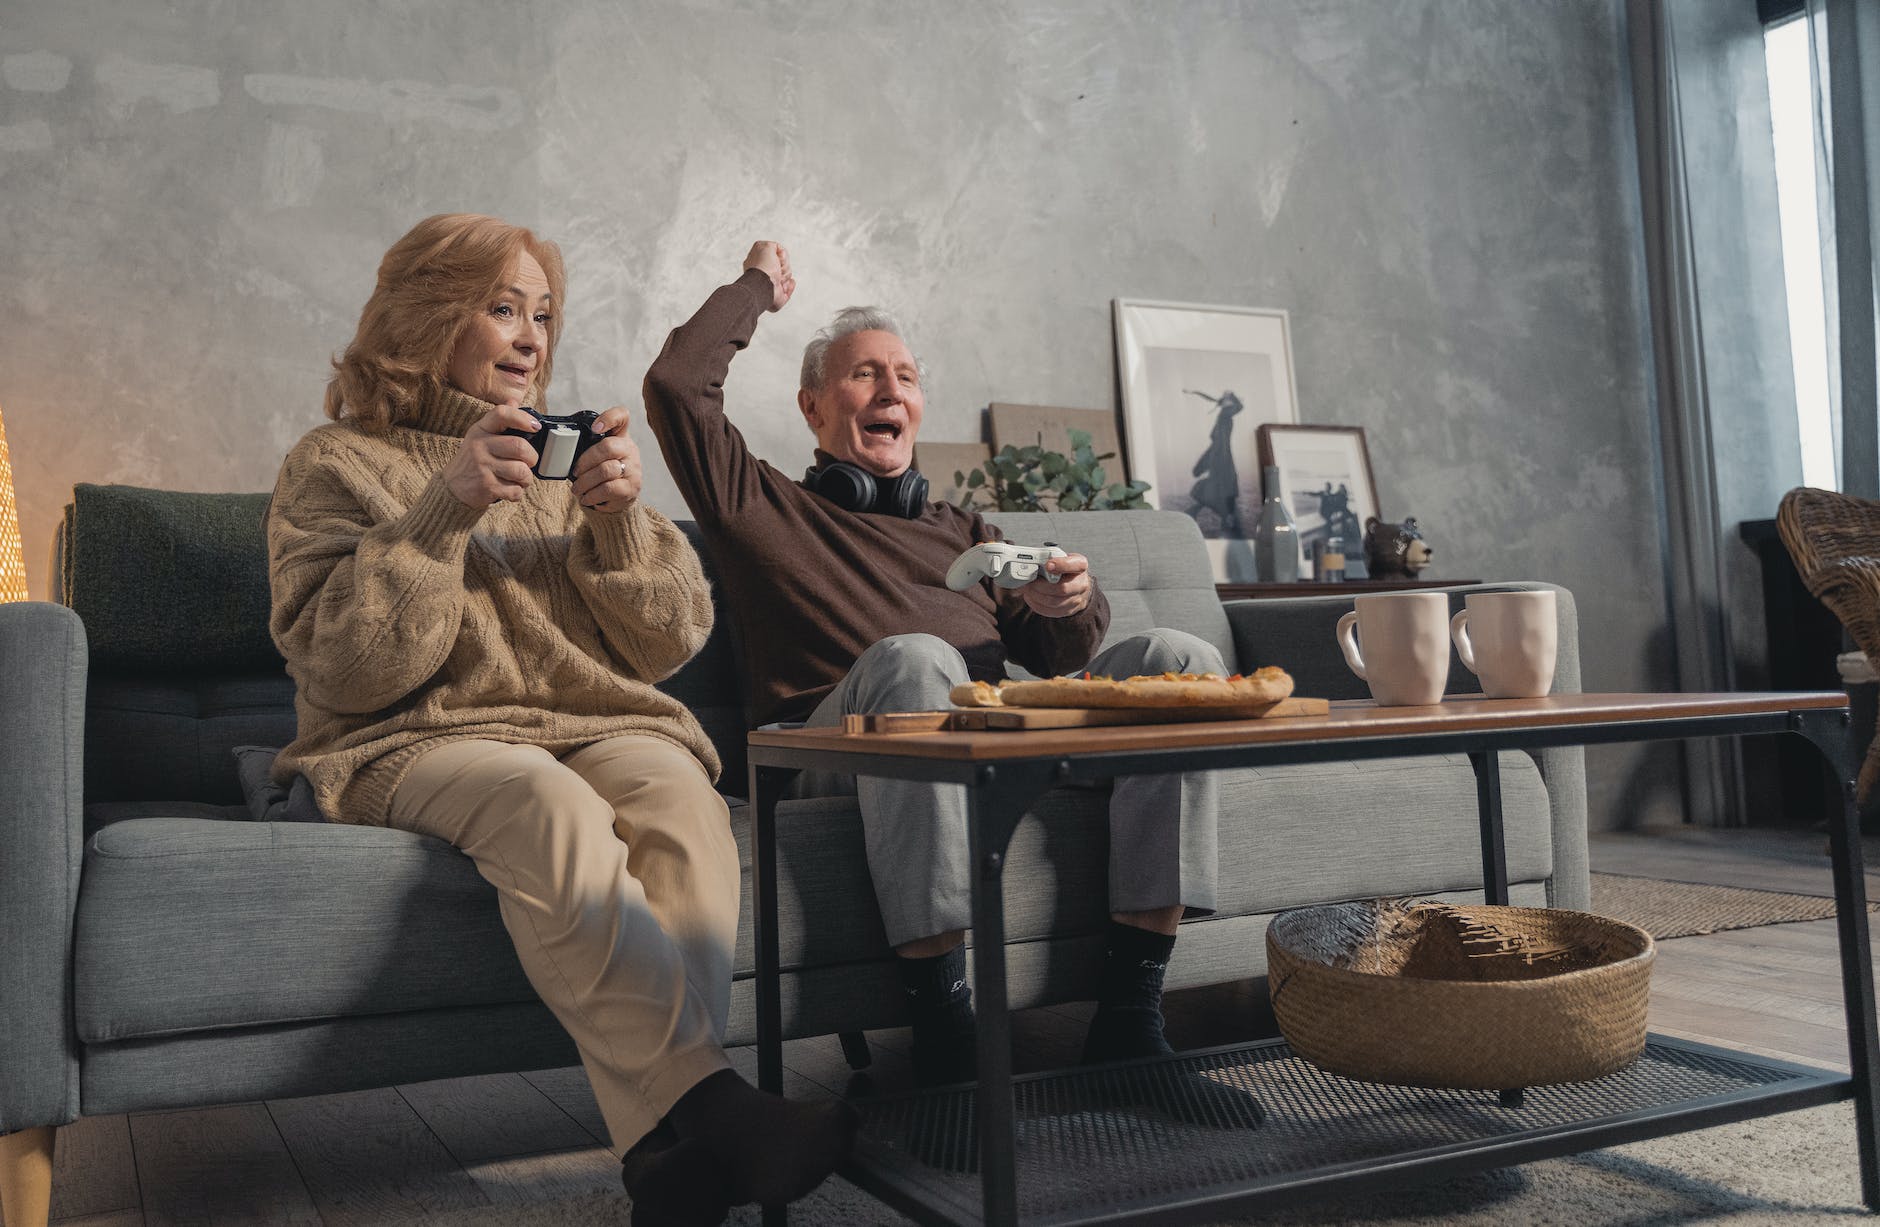 elderly couple sitting on couch playing video games